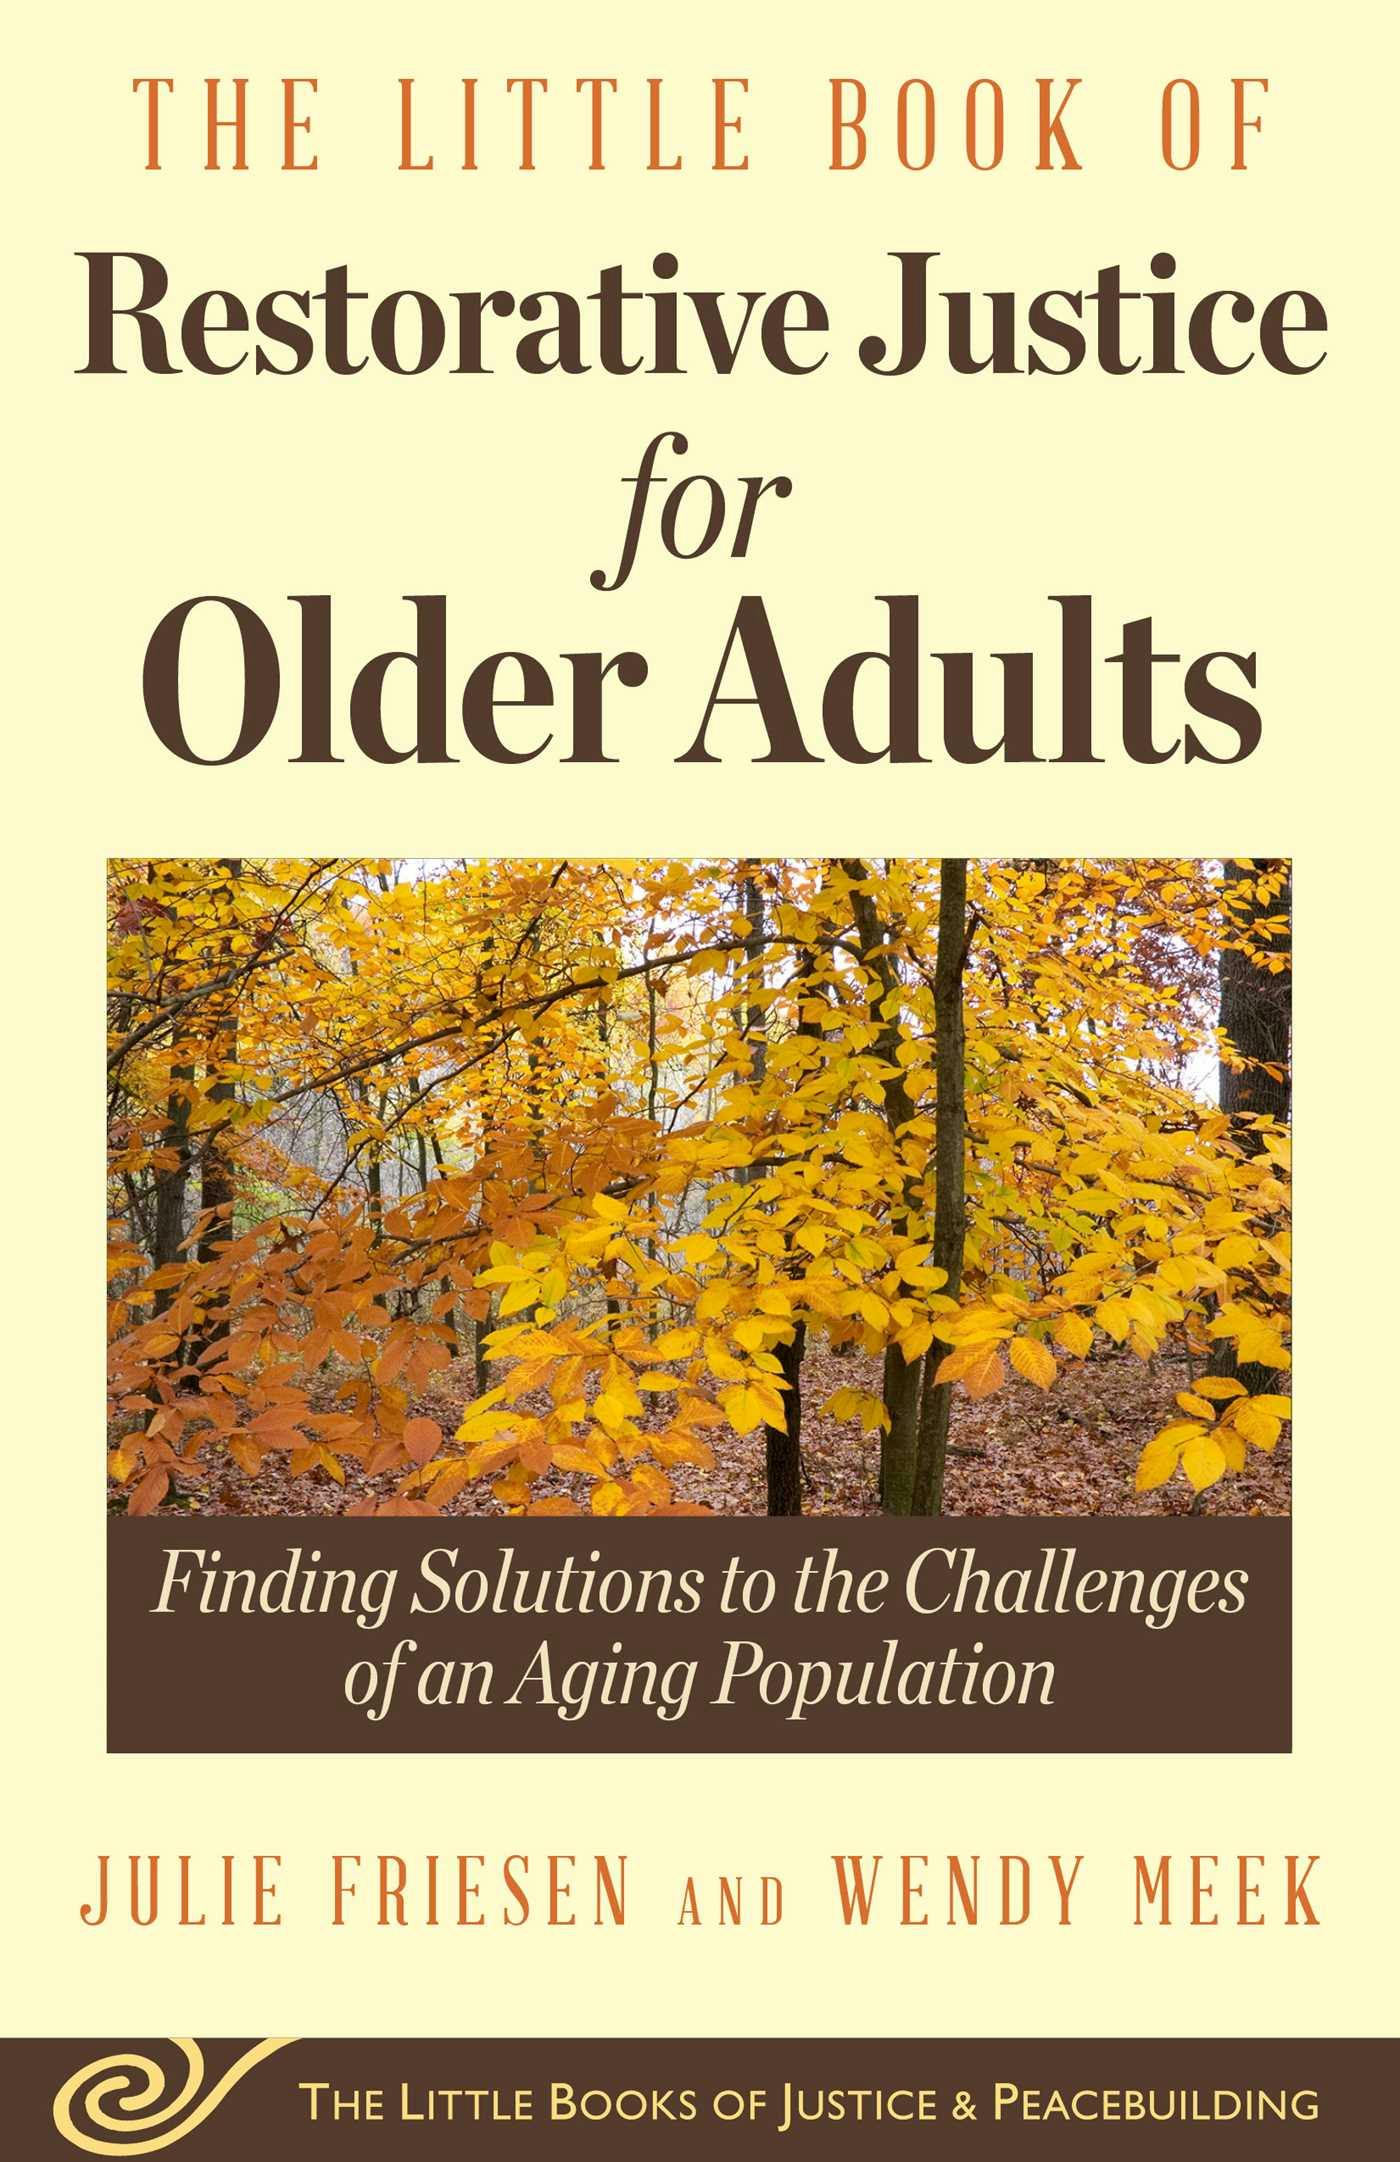 The Little Book of Restorative Justice for Older Adults: Finding Solutions to the Challenges of an Aging Population - Julie Friesen, Wendy Meek